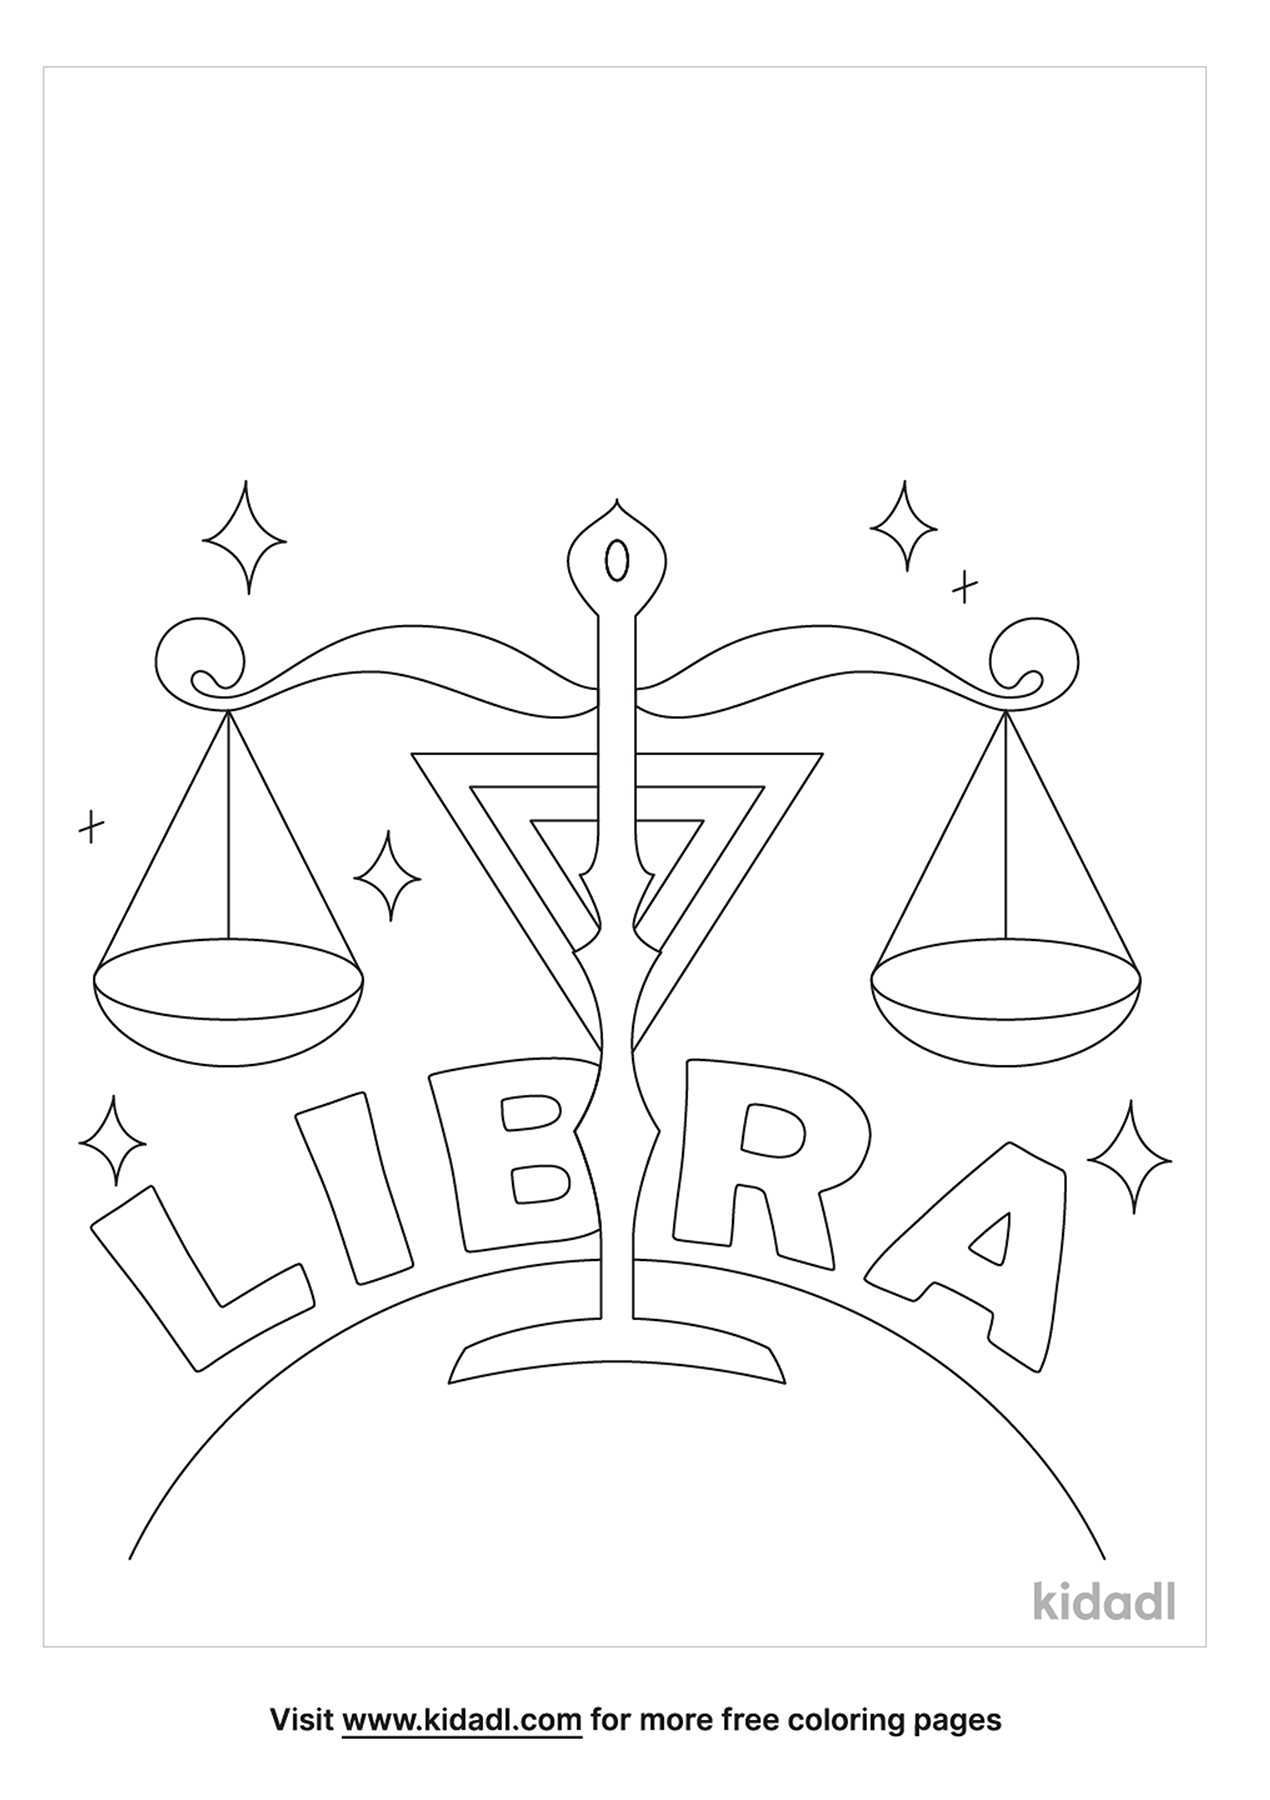 Libra Coloring Pages | Free Emojis, Shapes & Signs Coloring Pages | Kidadl